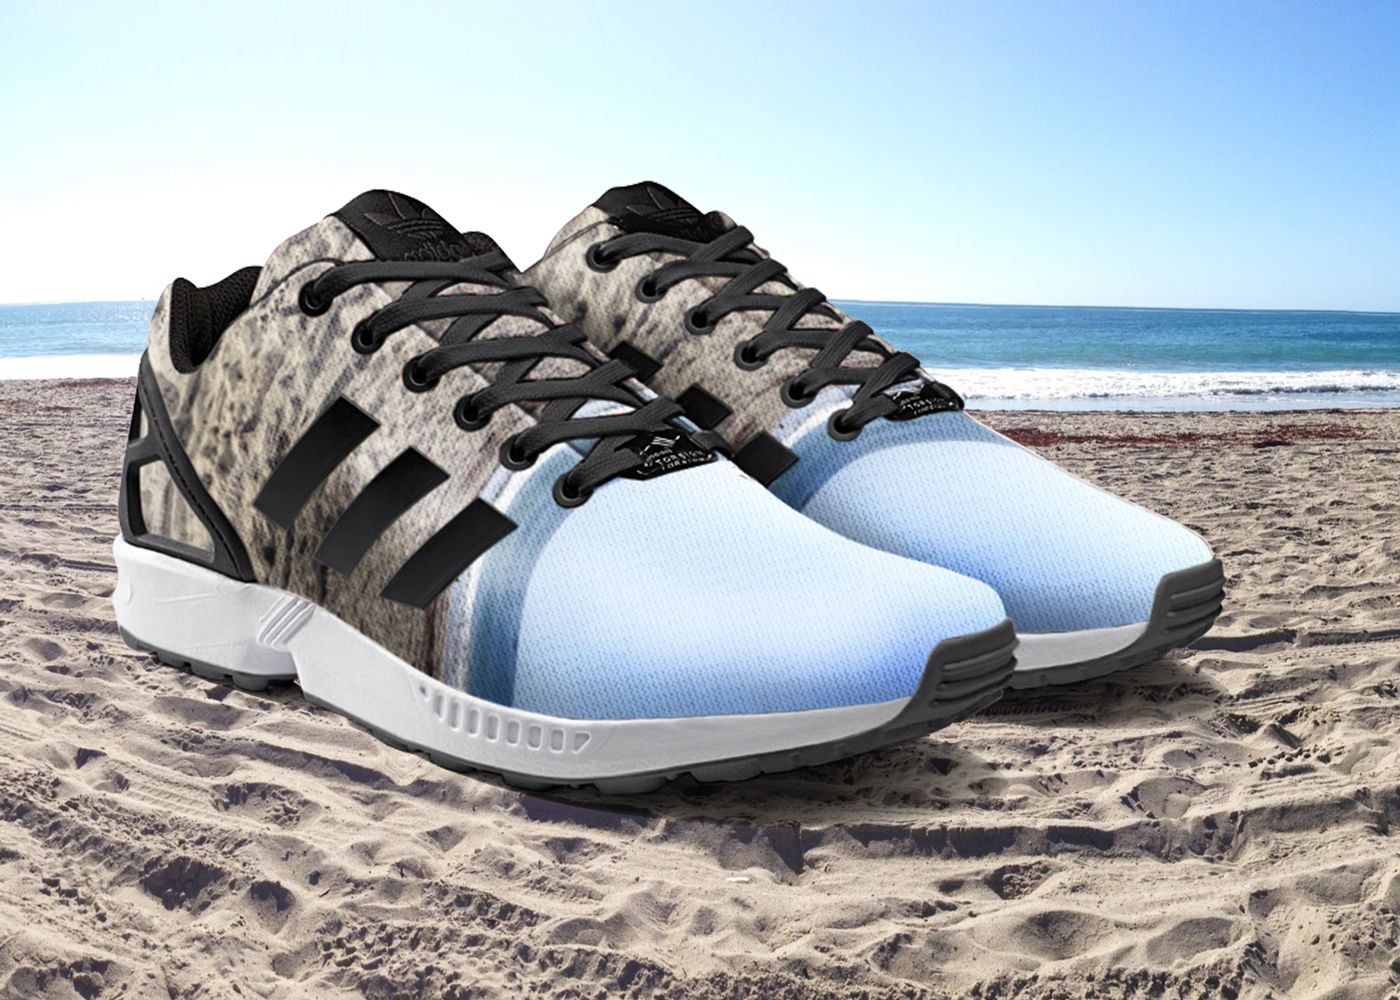 App lets Adidas sneakers with Instagram photos | CNN Business